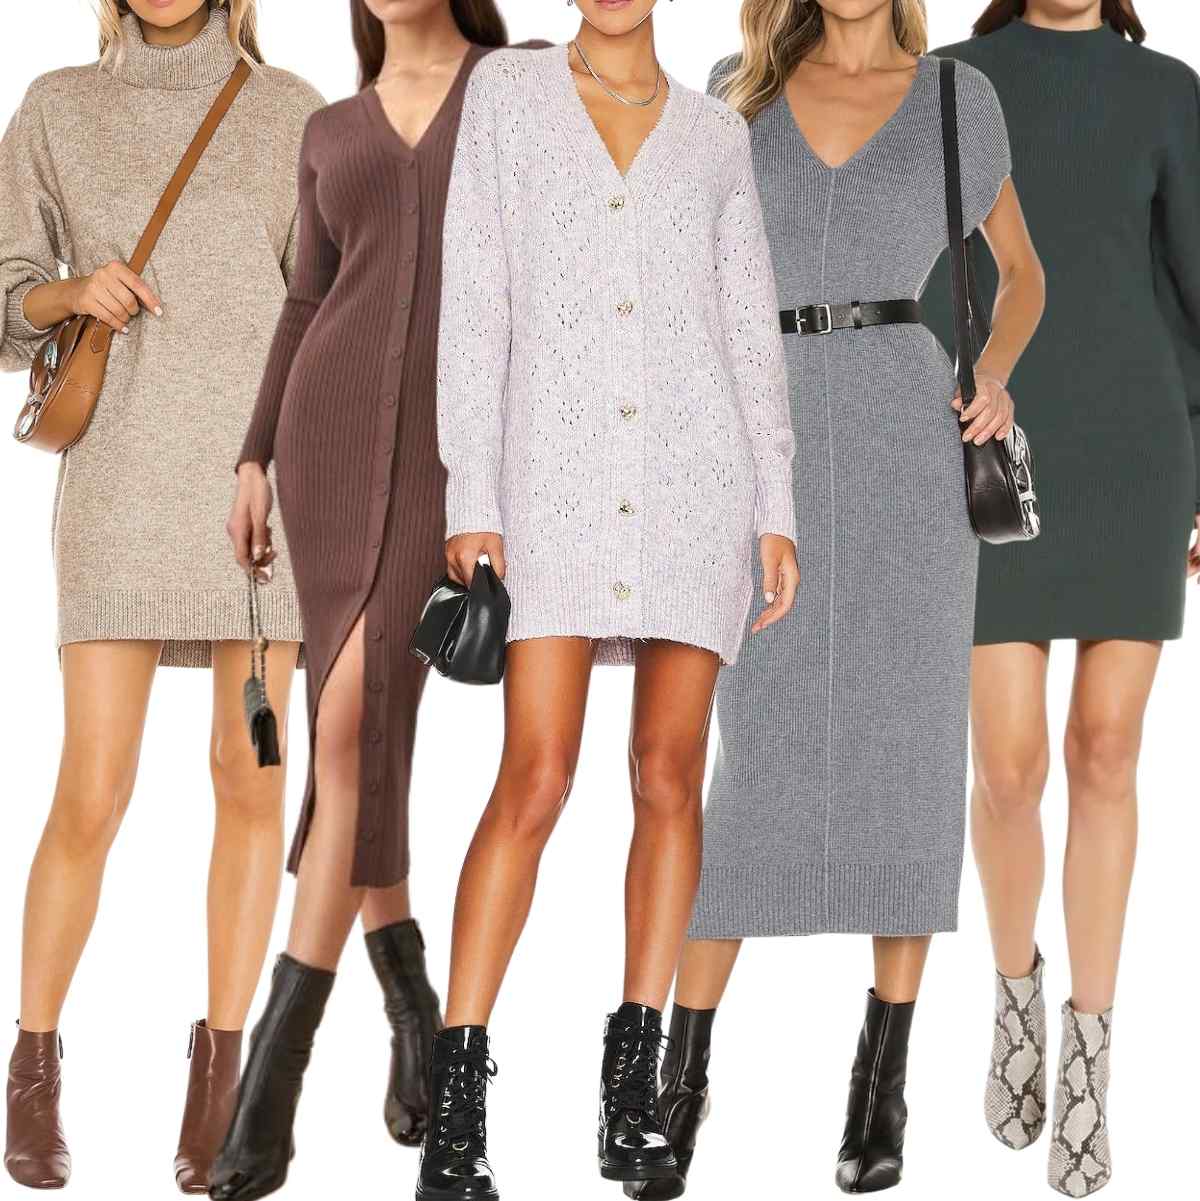 Collage of 5 women wearing different sweater dresses with ankle boots.